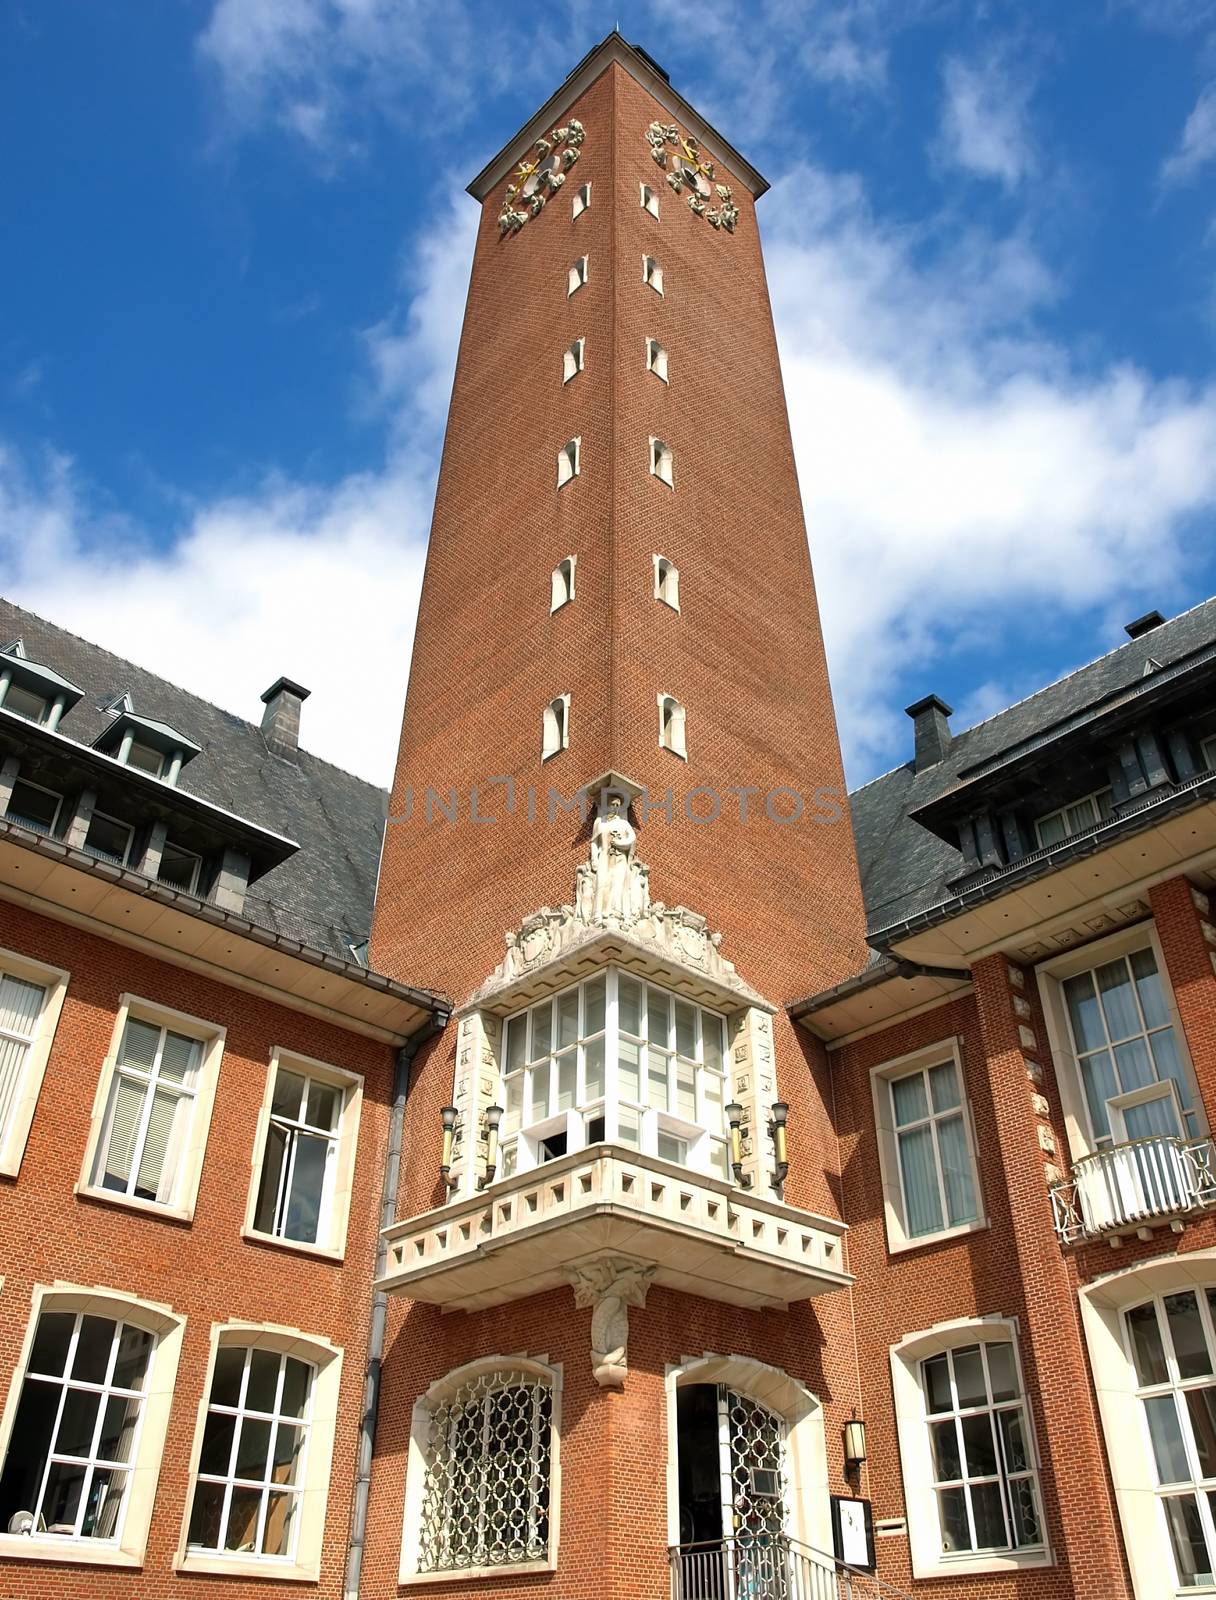 Tower of Town hall, Avenue Don Bosco, Woluwe Saint Pierre, Belgium, Brussels.